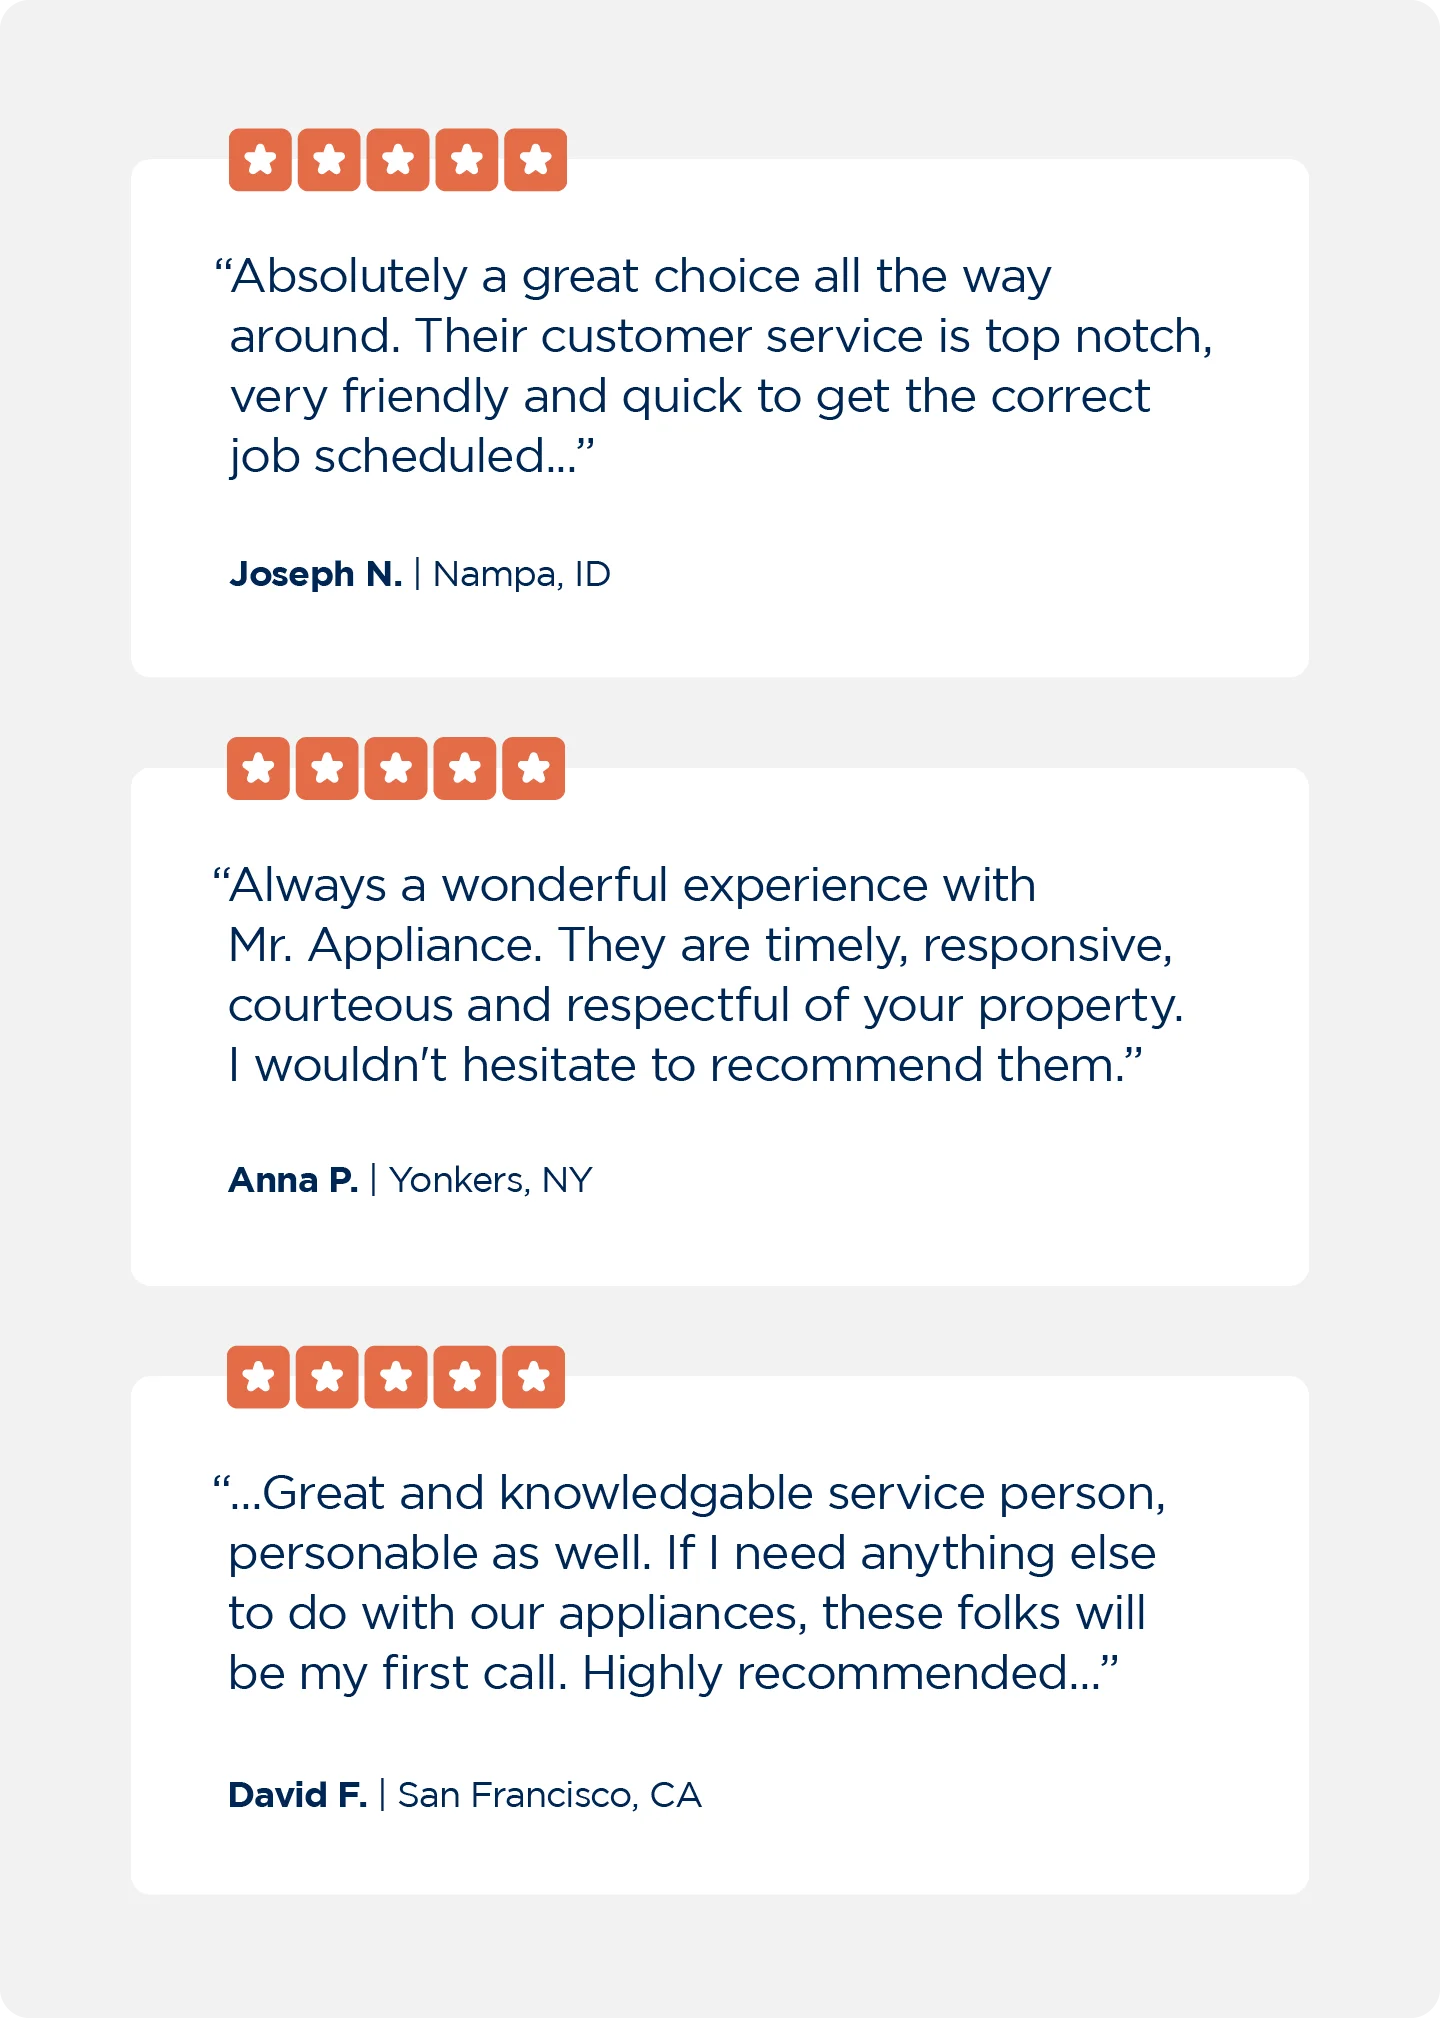 Reviewers of Mr. Appliance recommend our service professionals and agree that service professionals are friendly, timely, and knowledgeable.